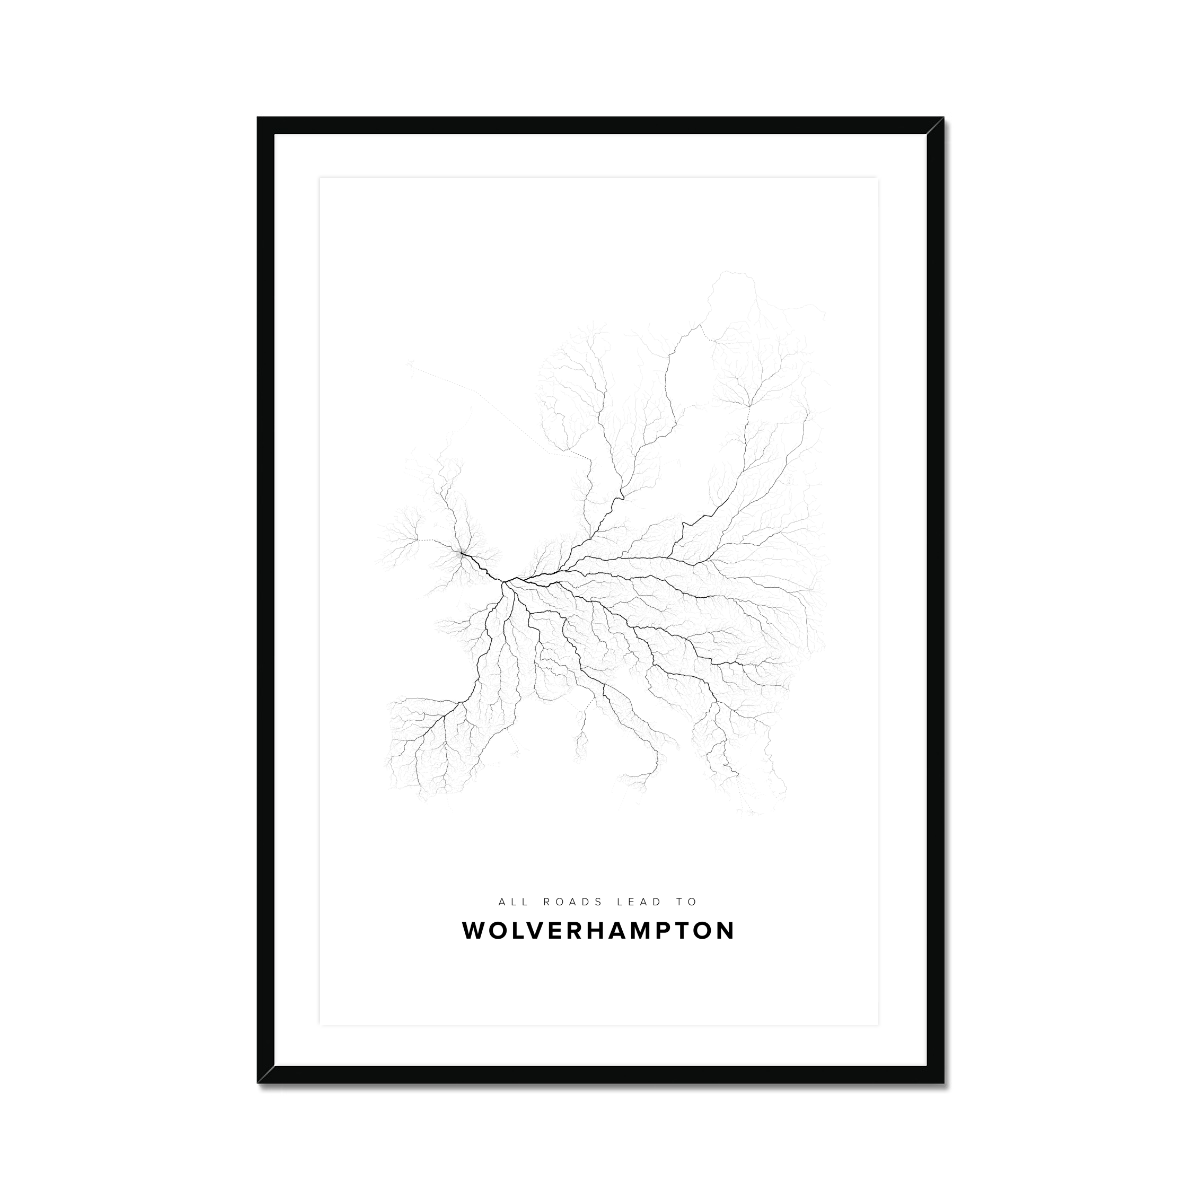 All roads lead to Wolverhampton (United Kingdom of Great Britain and Northern Ireland) Fine Art Map Print